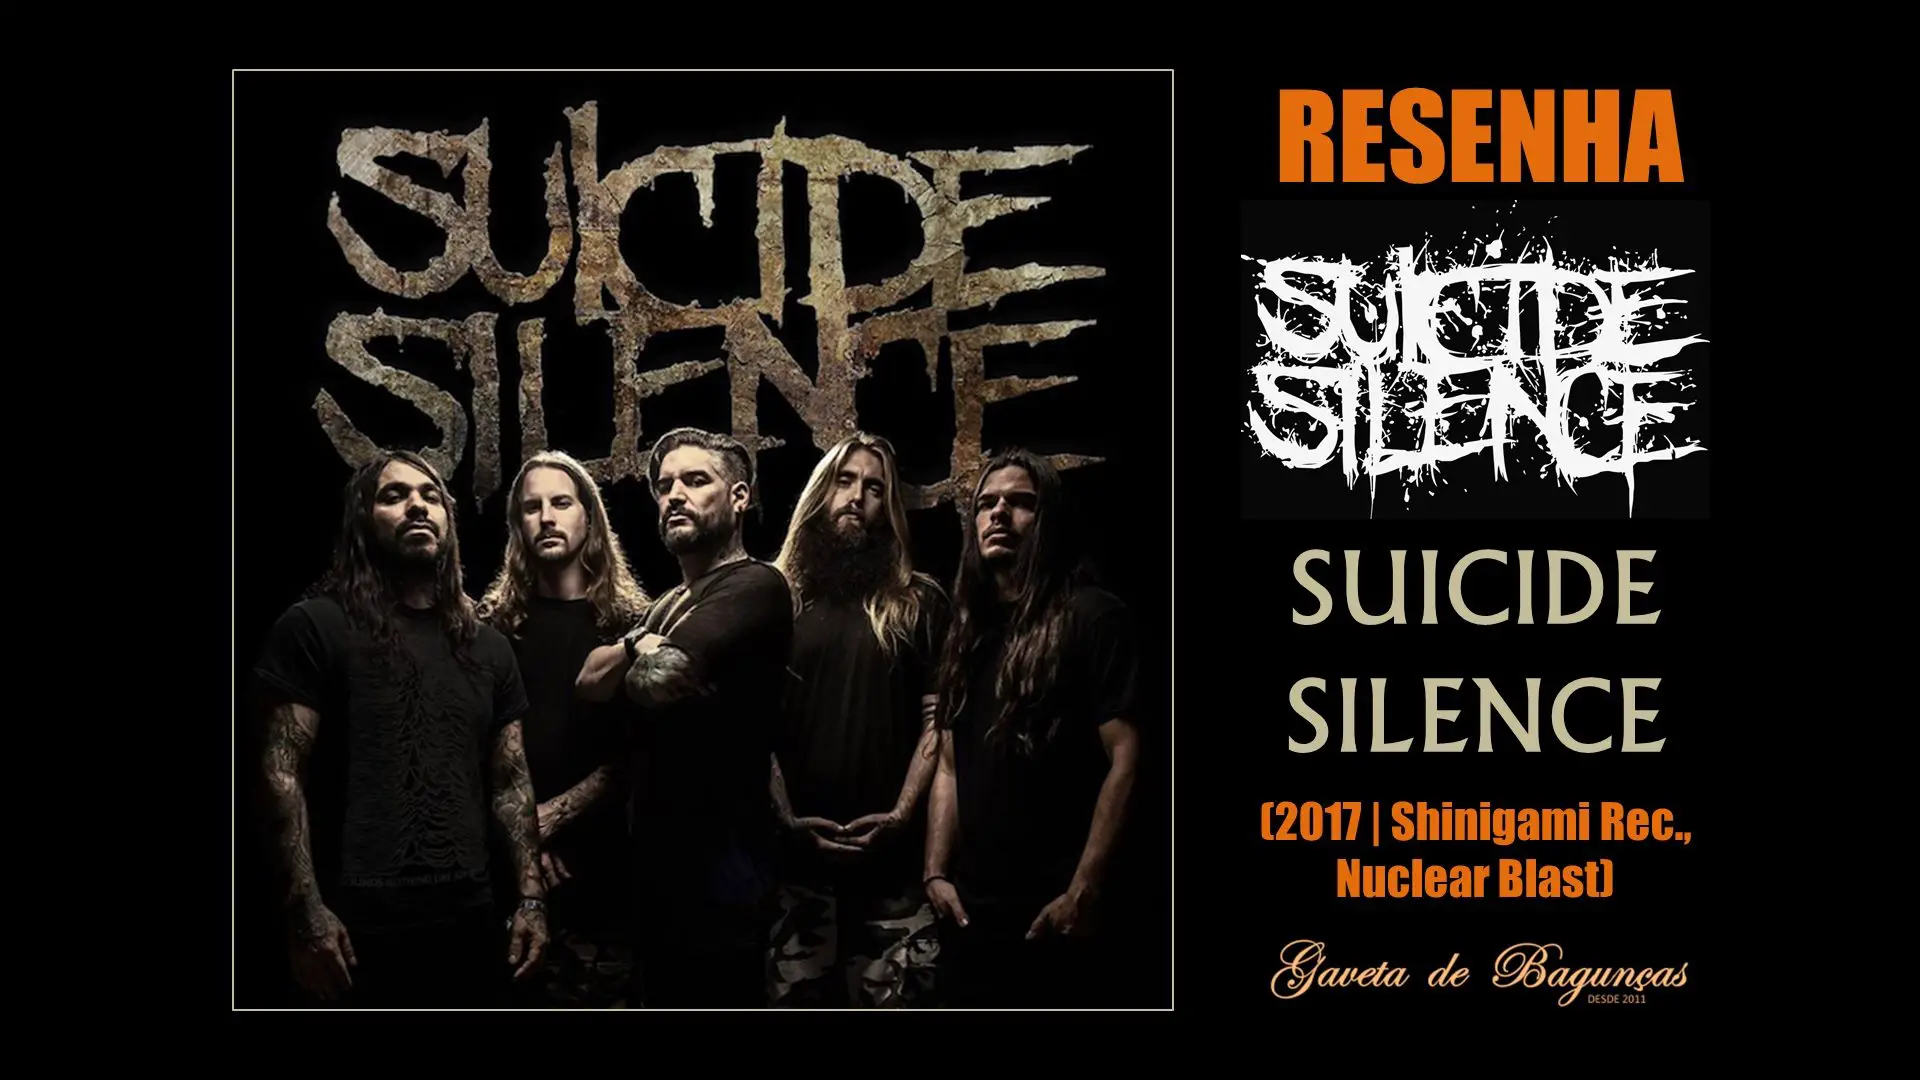 Suicide Silence - Suicide Silence (2017, Shinigami Records, Nuclear Blast)